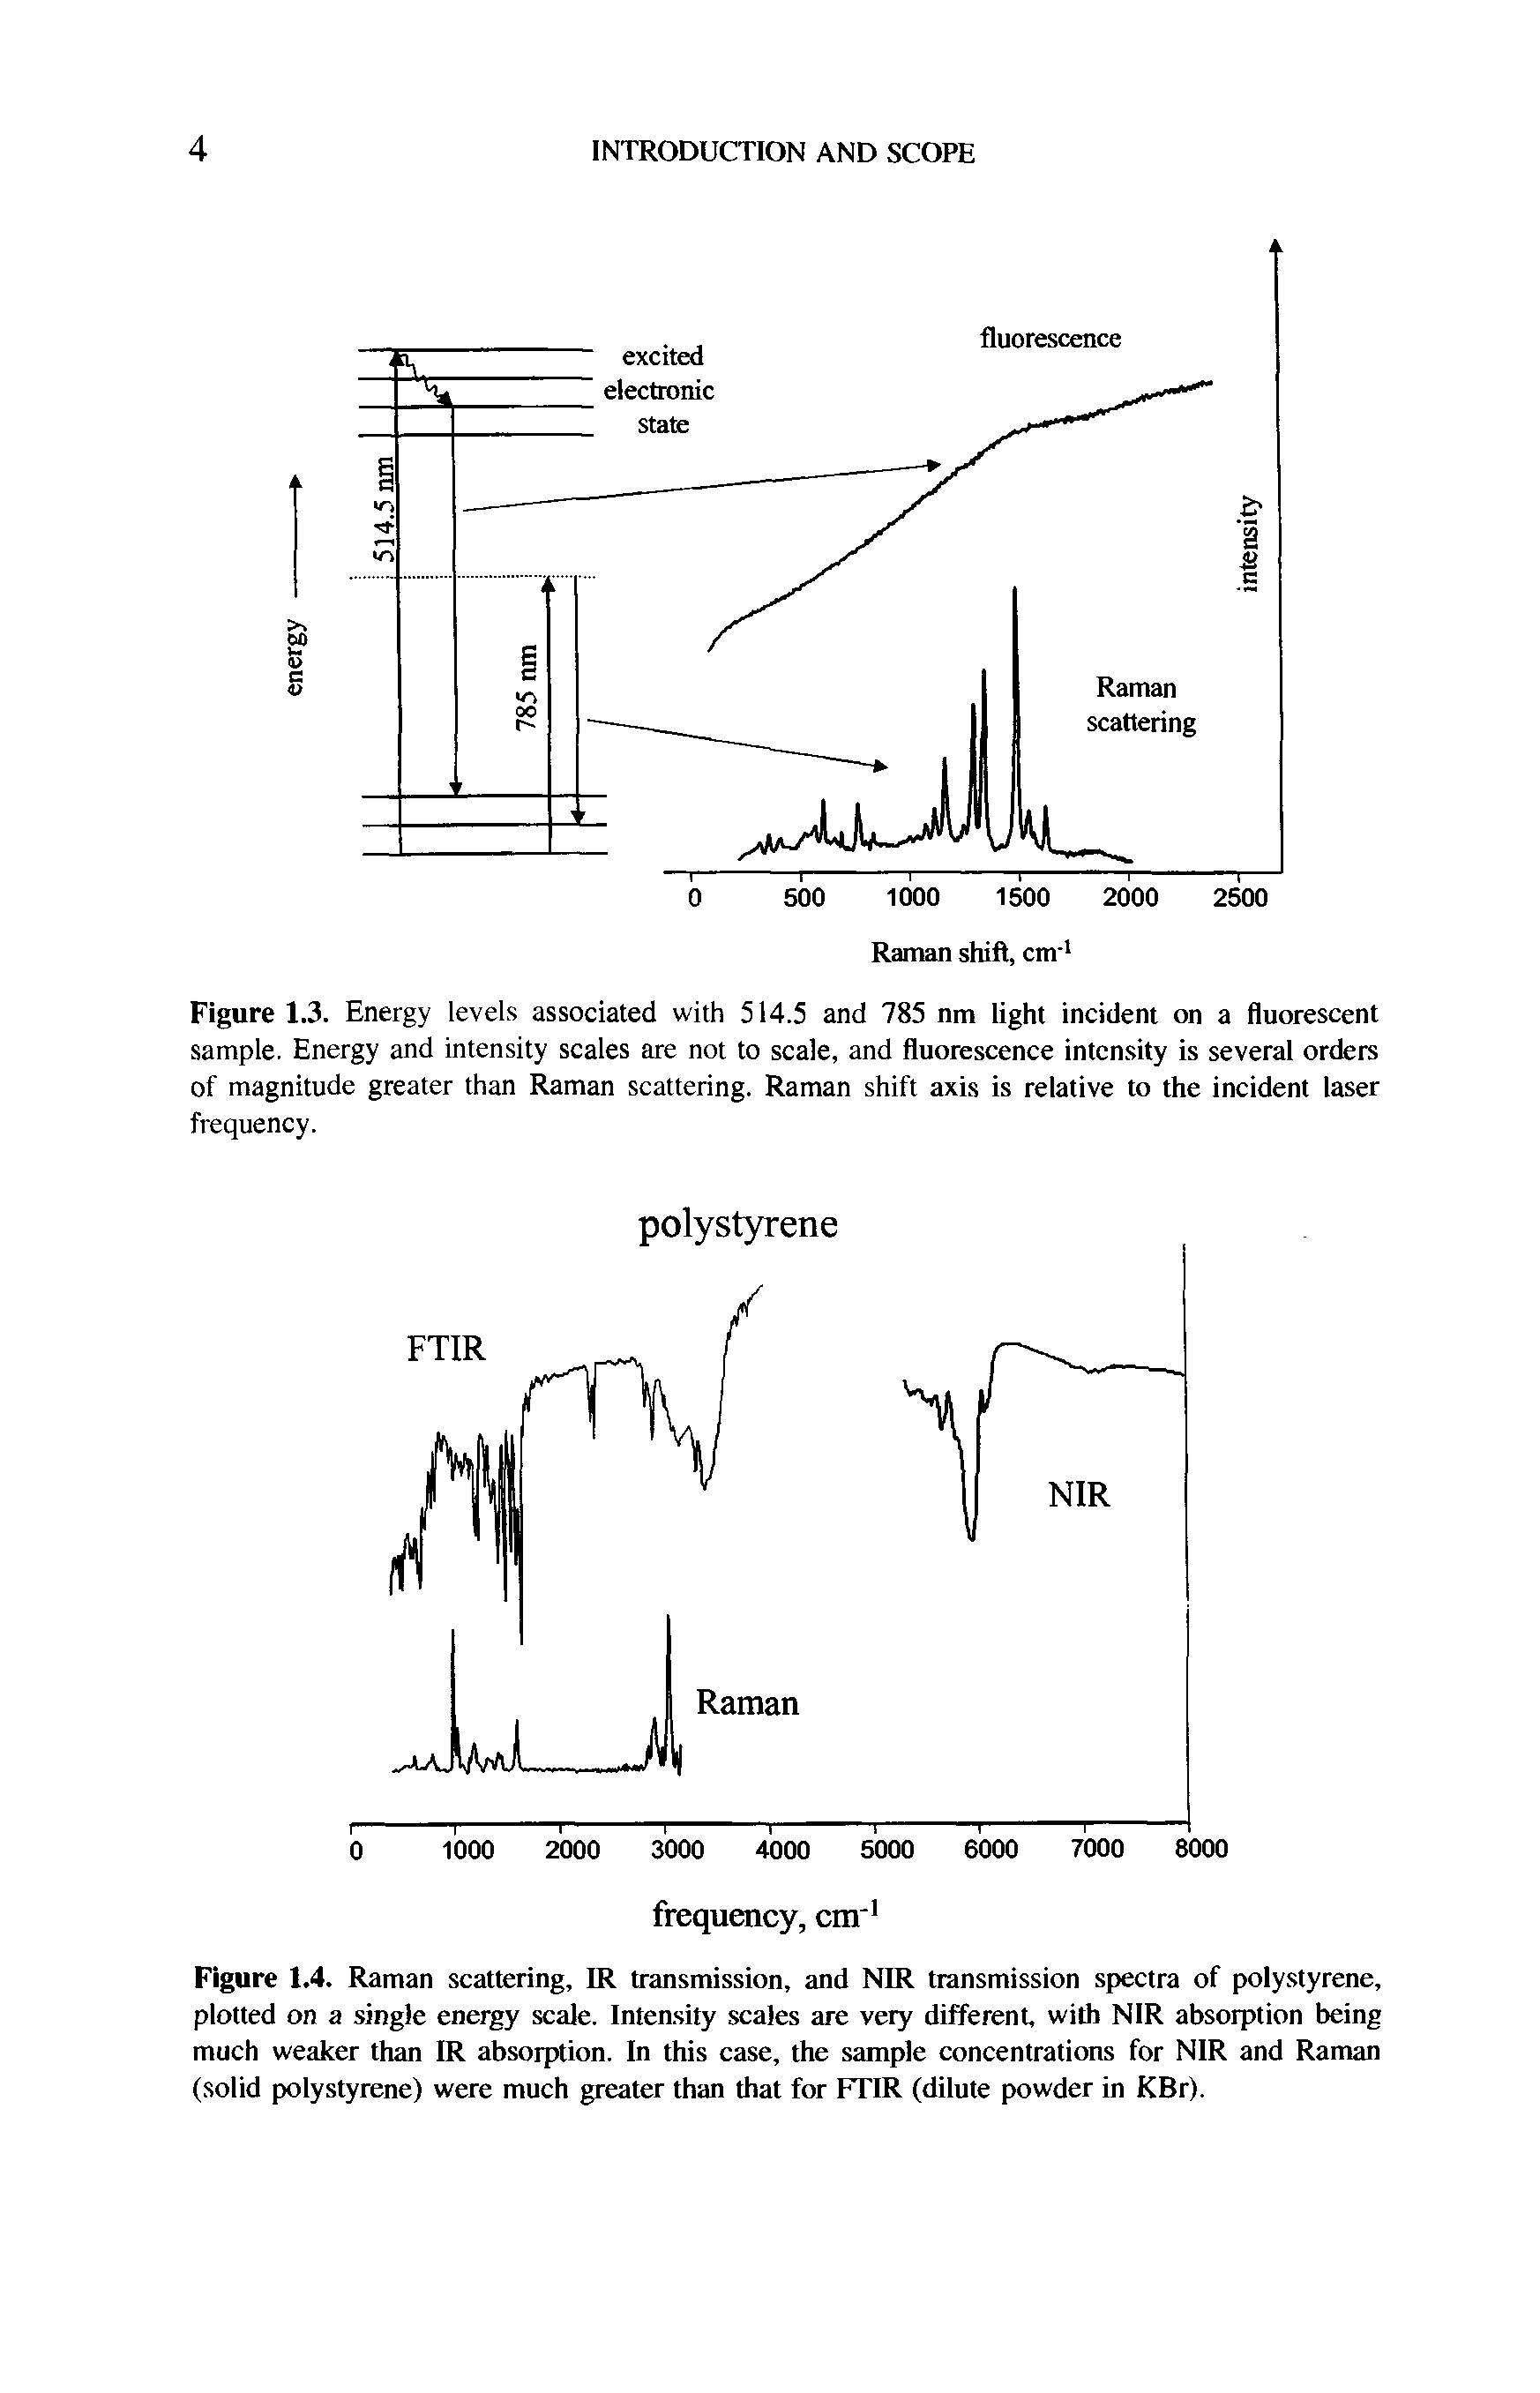 Figure 1.3. Energy levels associated with 514.5 and 785 nm light incident on a fluorescent sample. Energy and intensity scales are not to scale, and fluorescence intensity is several orders of magnitude greater than Raman scattering. Raman shift axis is relative to the incident laser frequency.